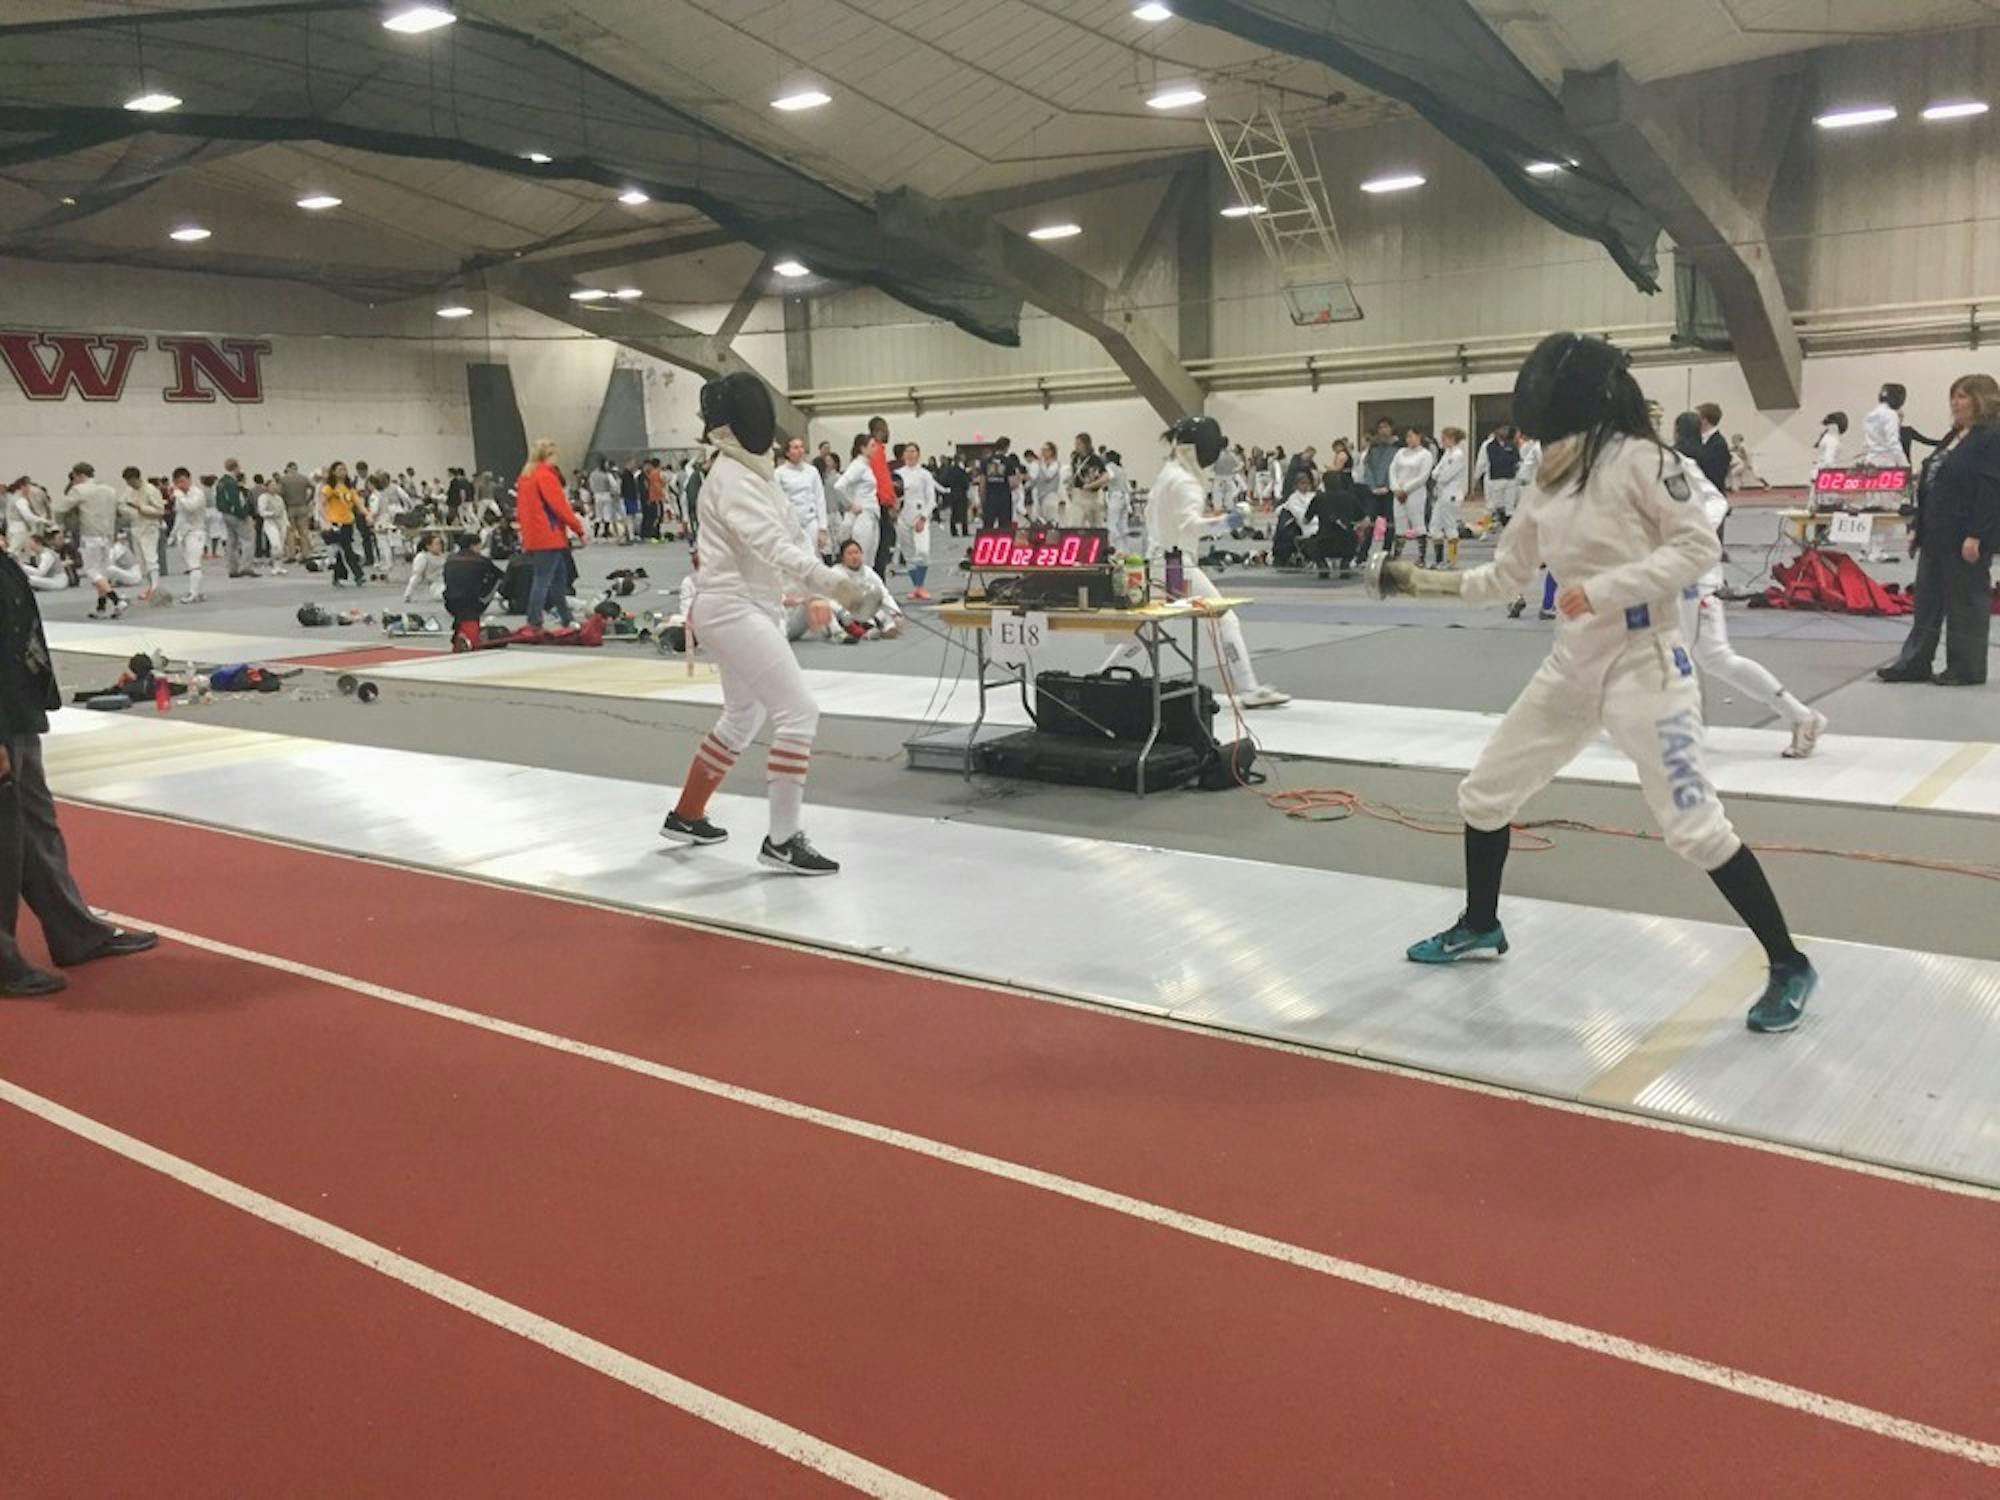 Overall, the fencing team took second place.